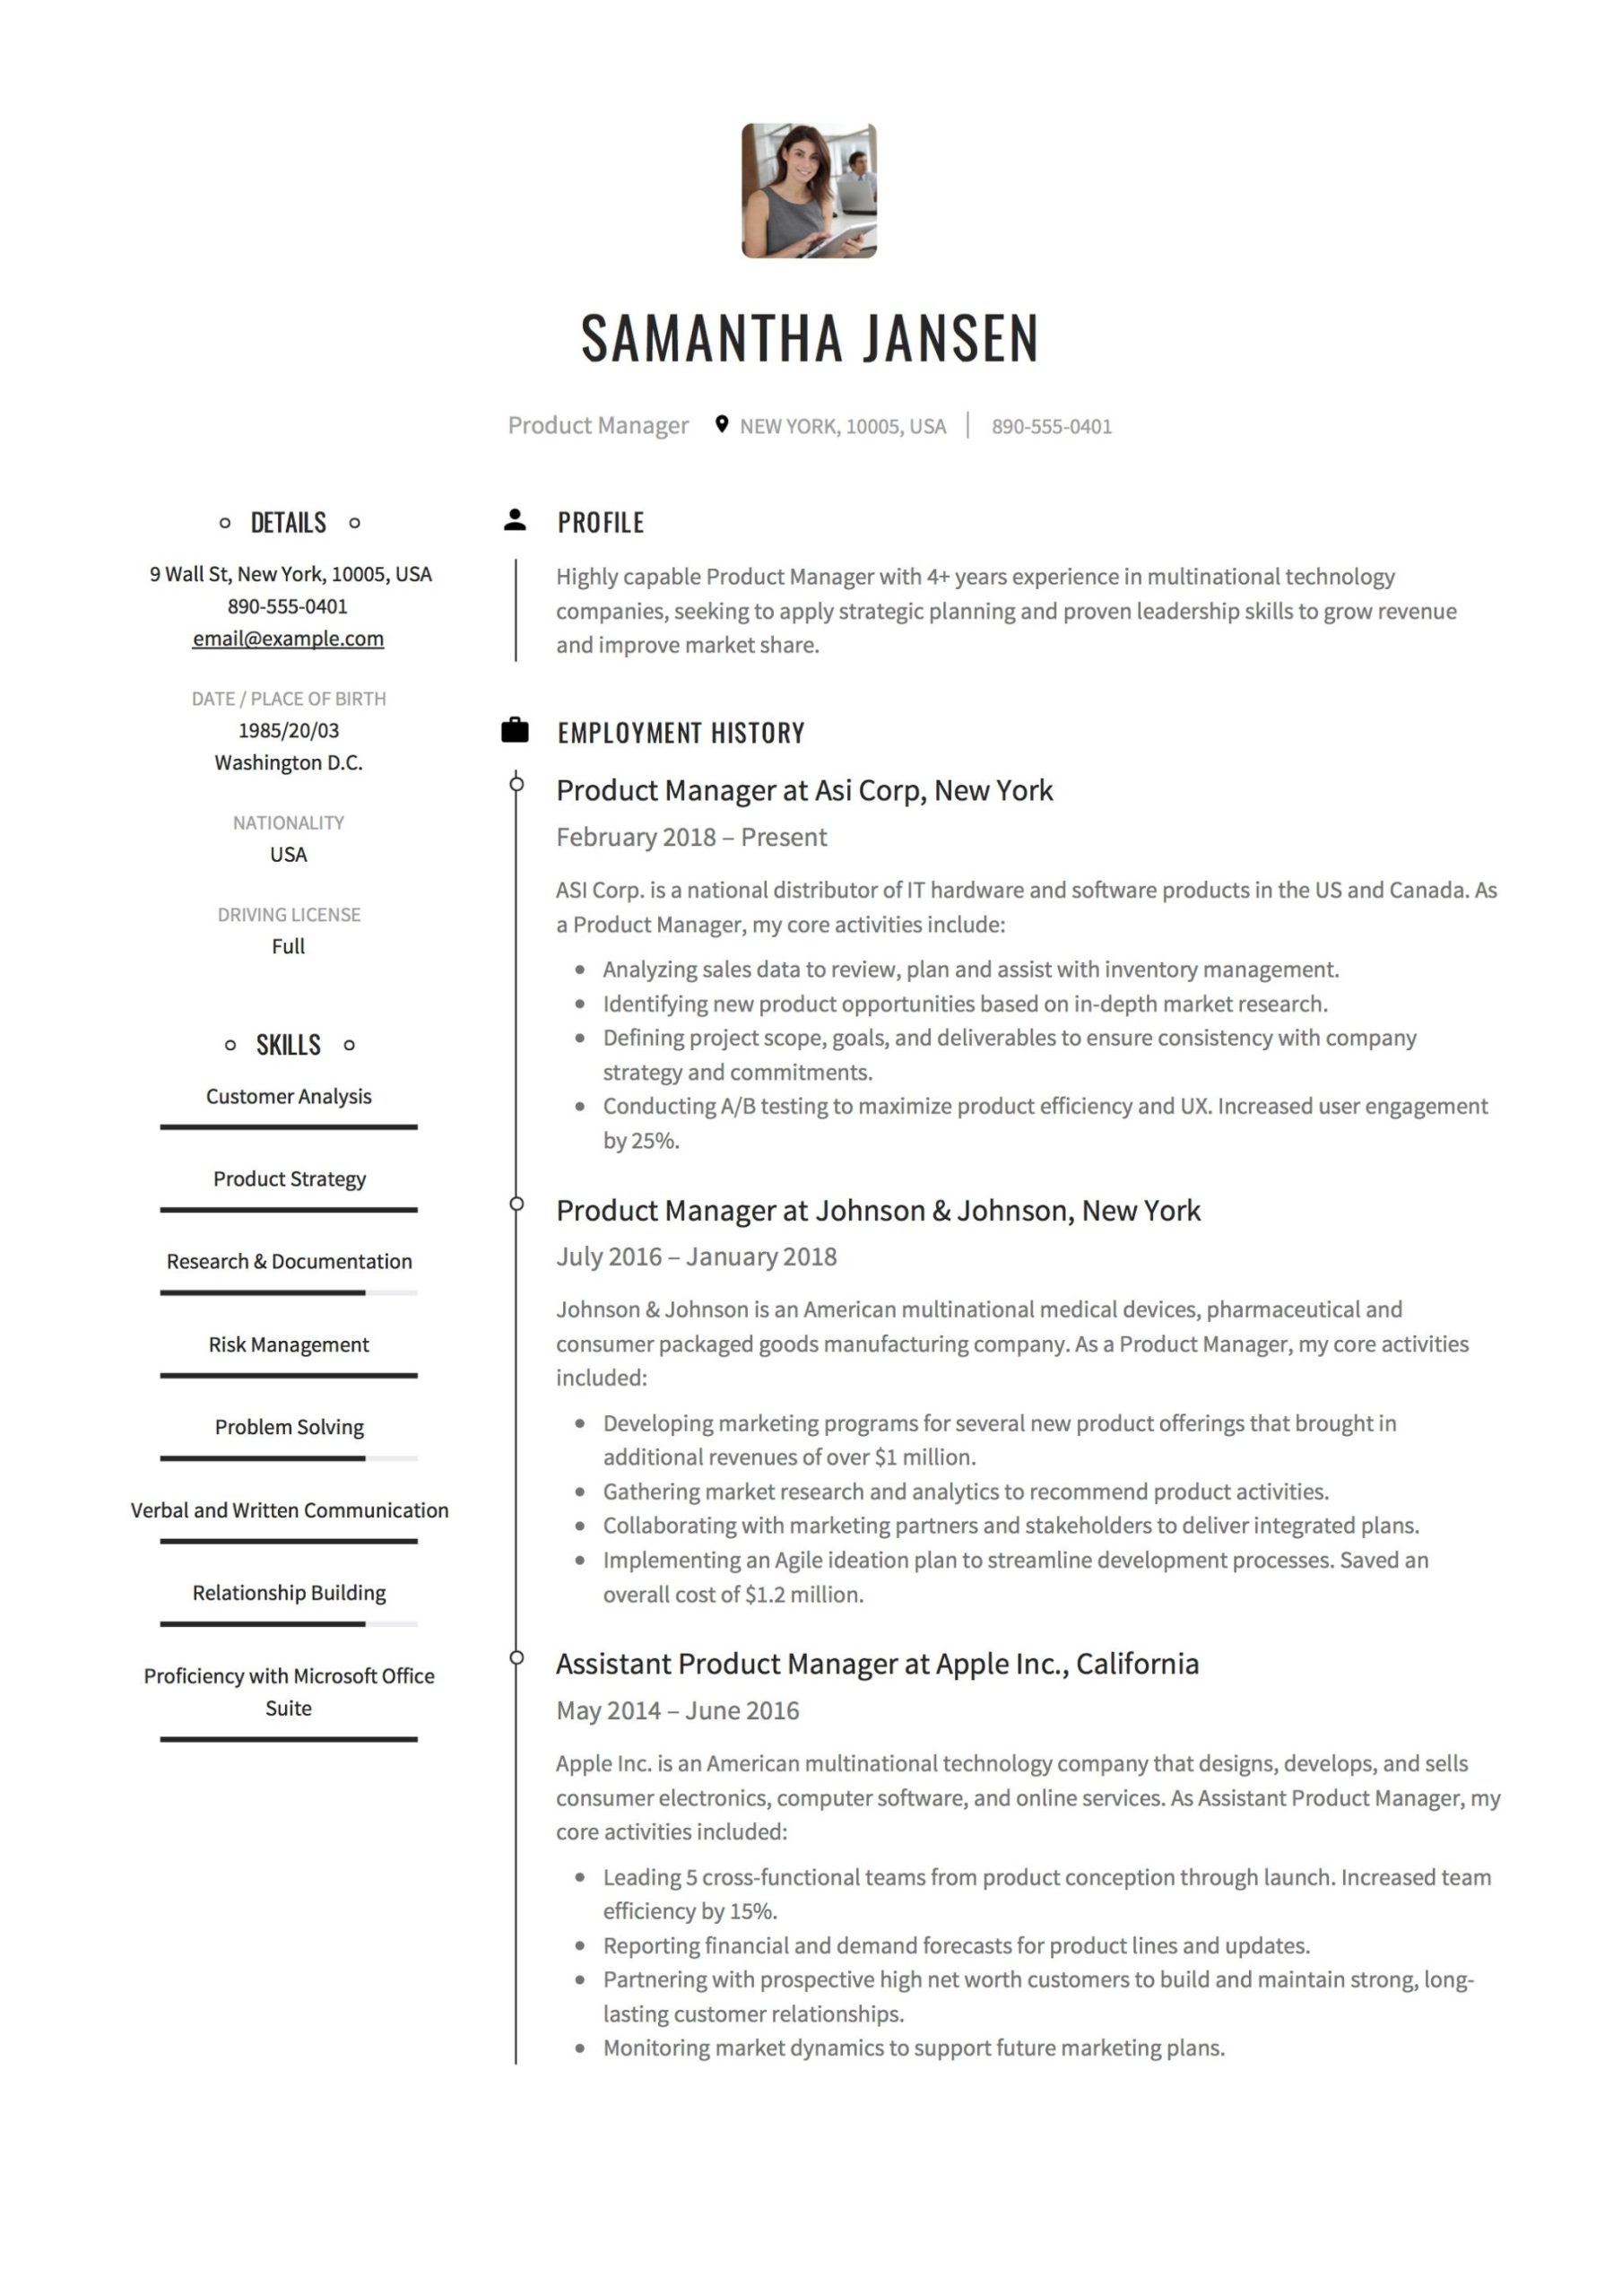 Software Product Development Manager Resume Sample Product Manager Resume & Guide   12 Samples Pdf 2020